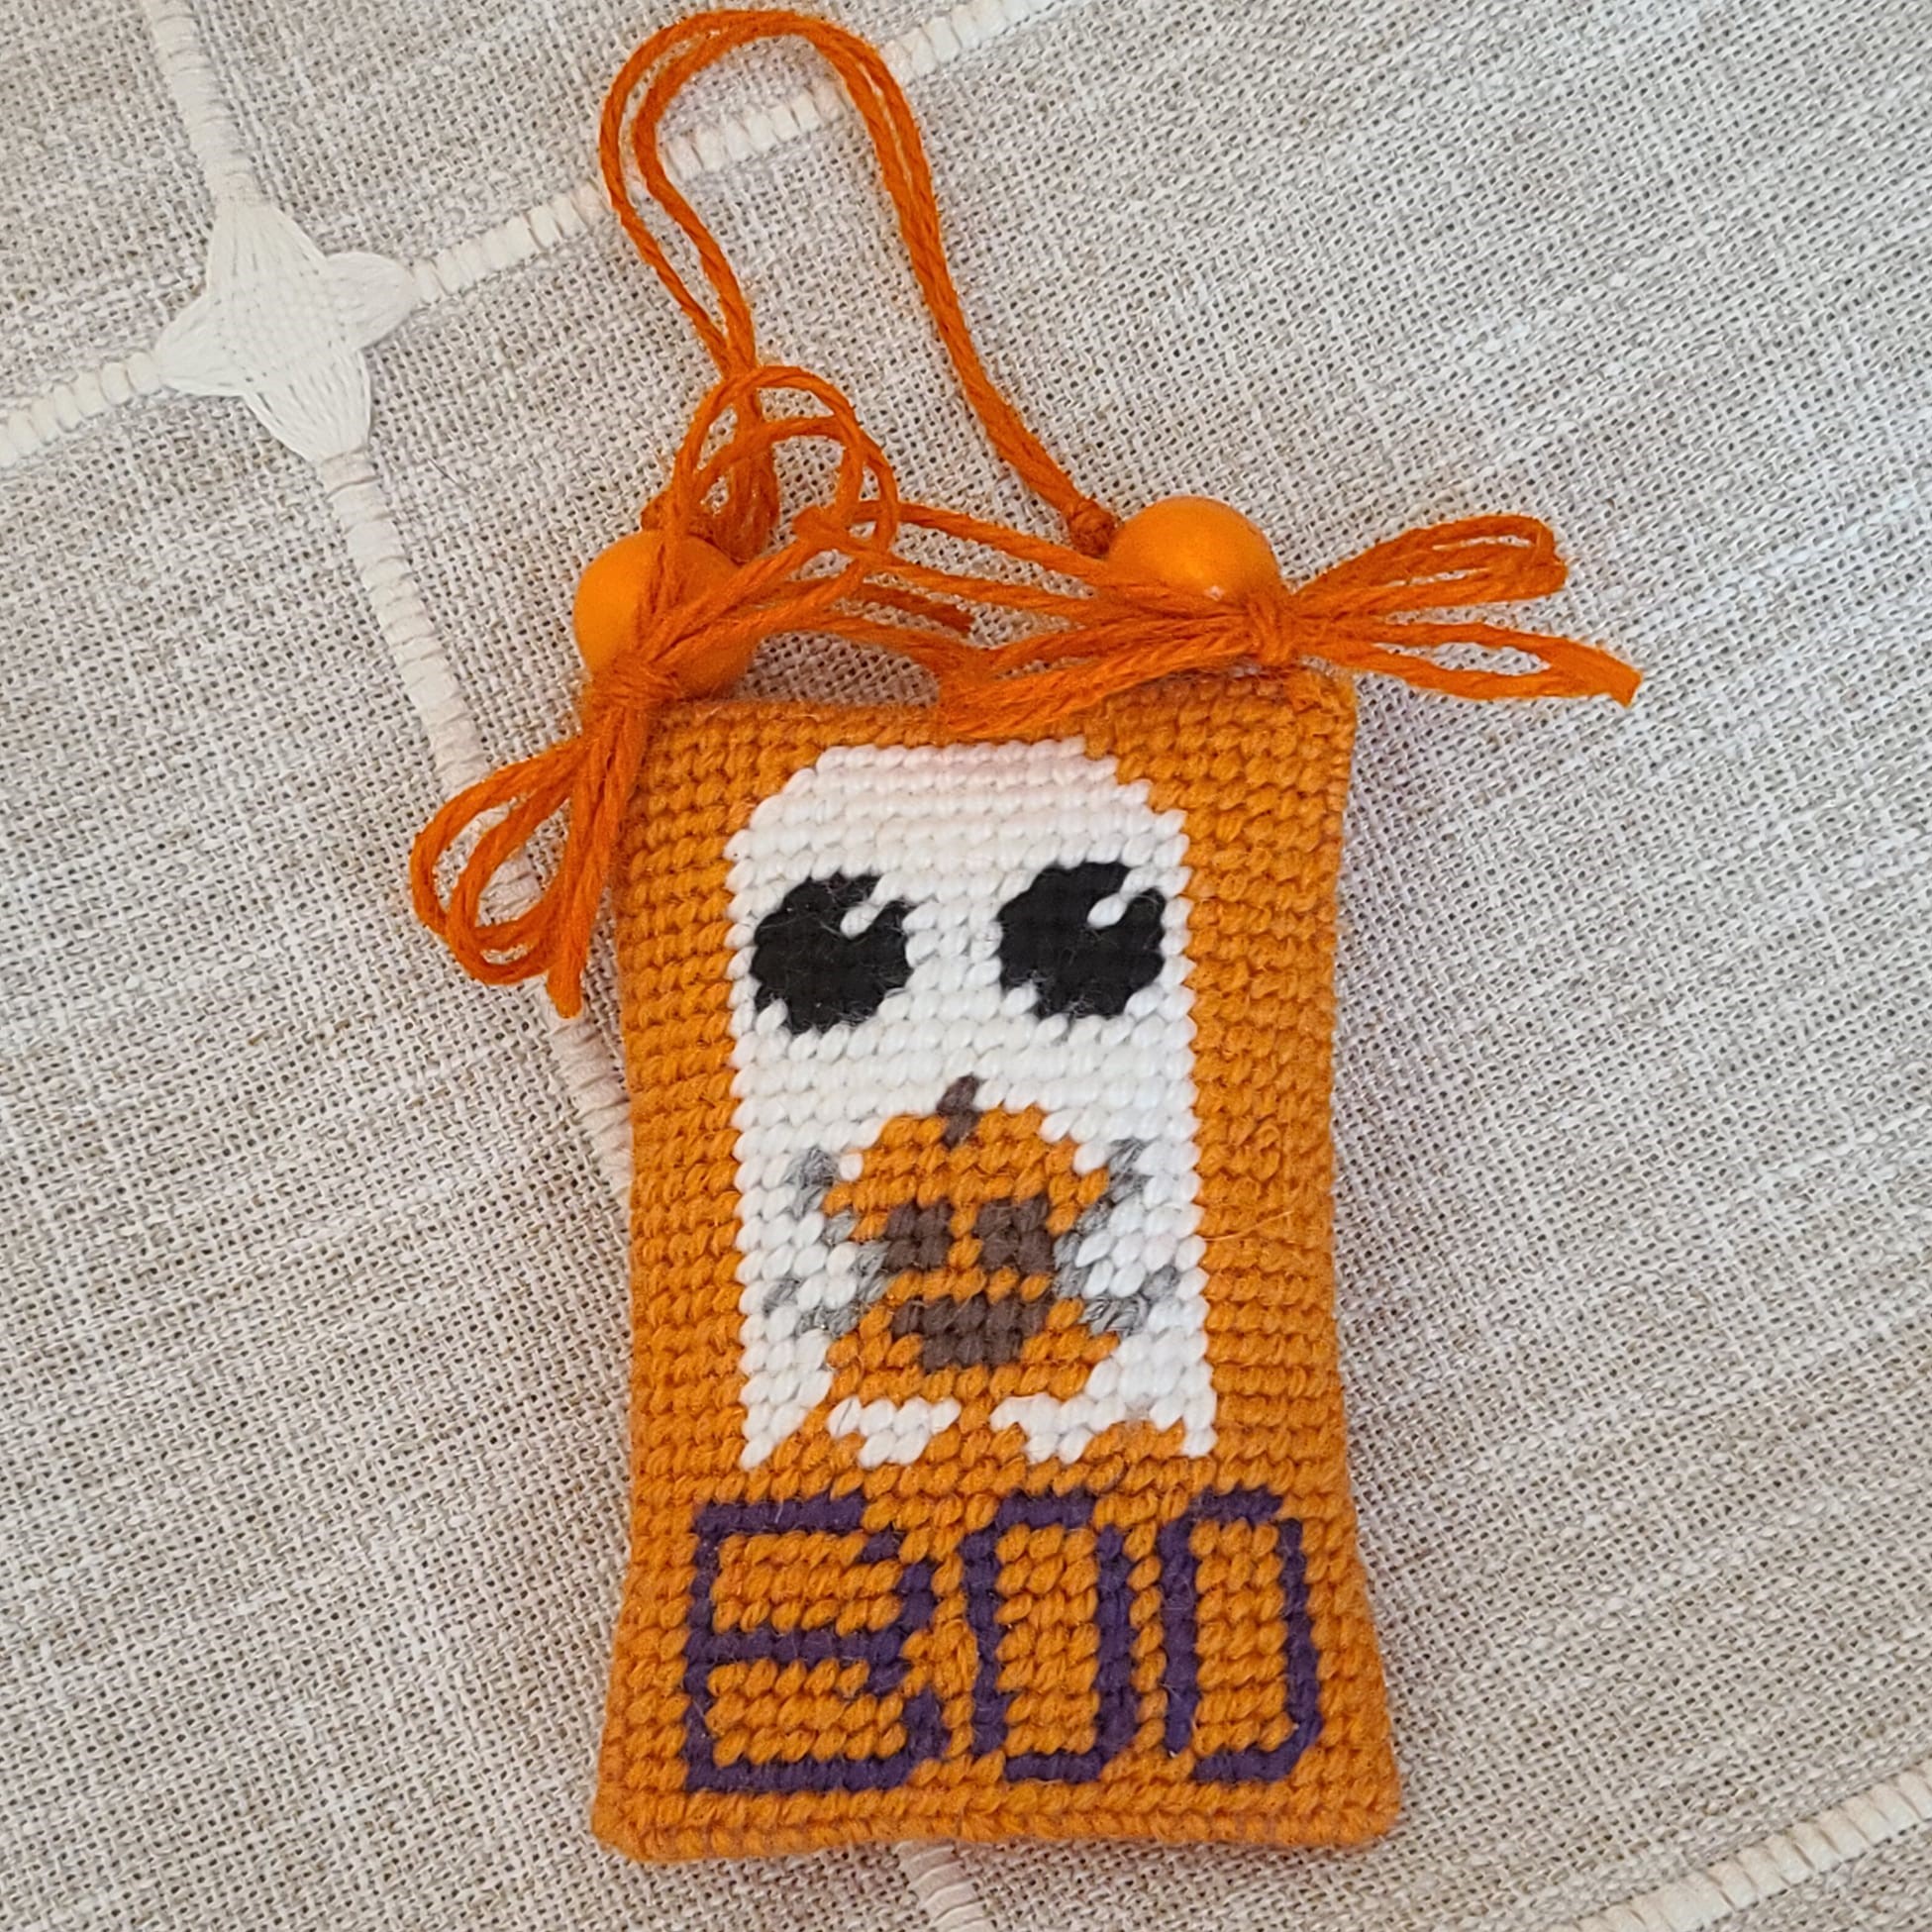 Halloween finished needlepoint BOO ghost ornament